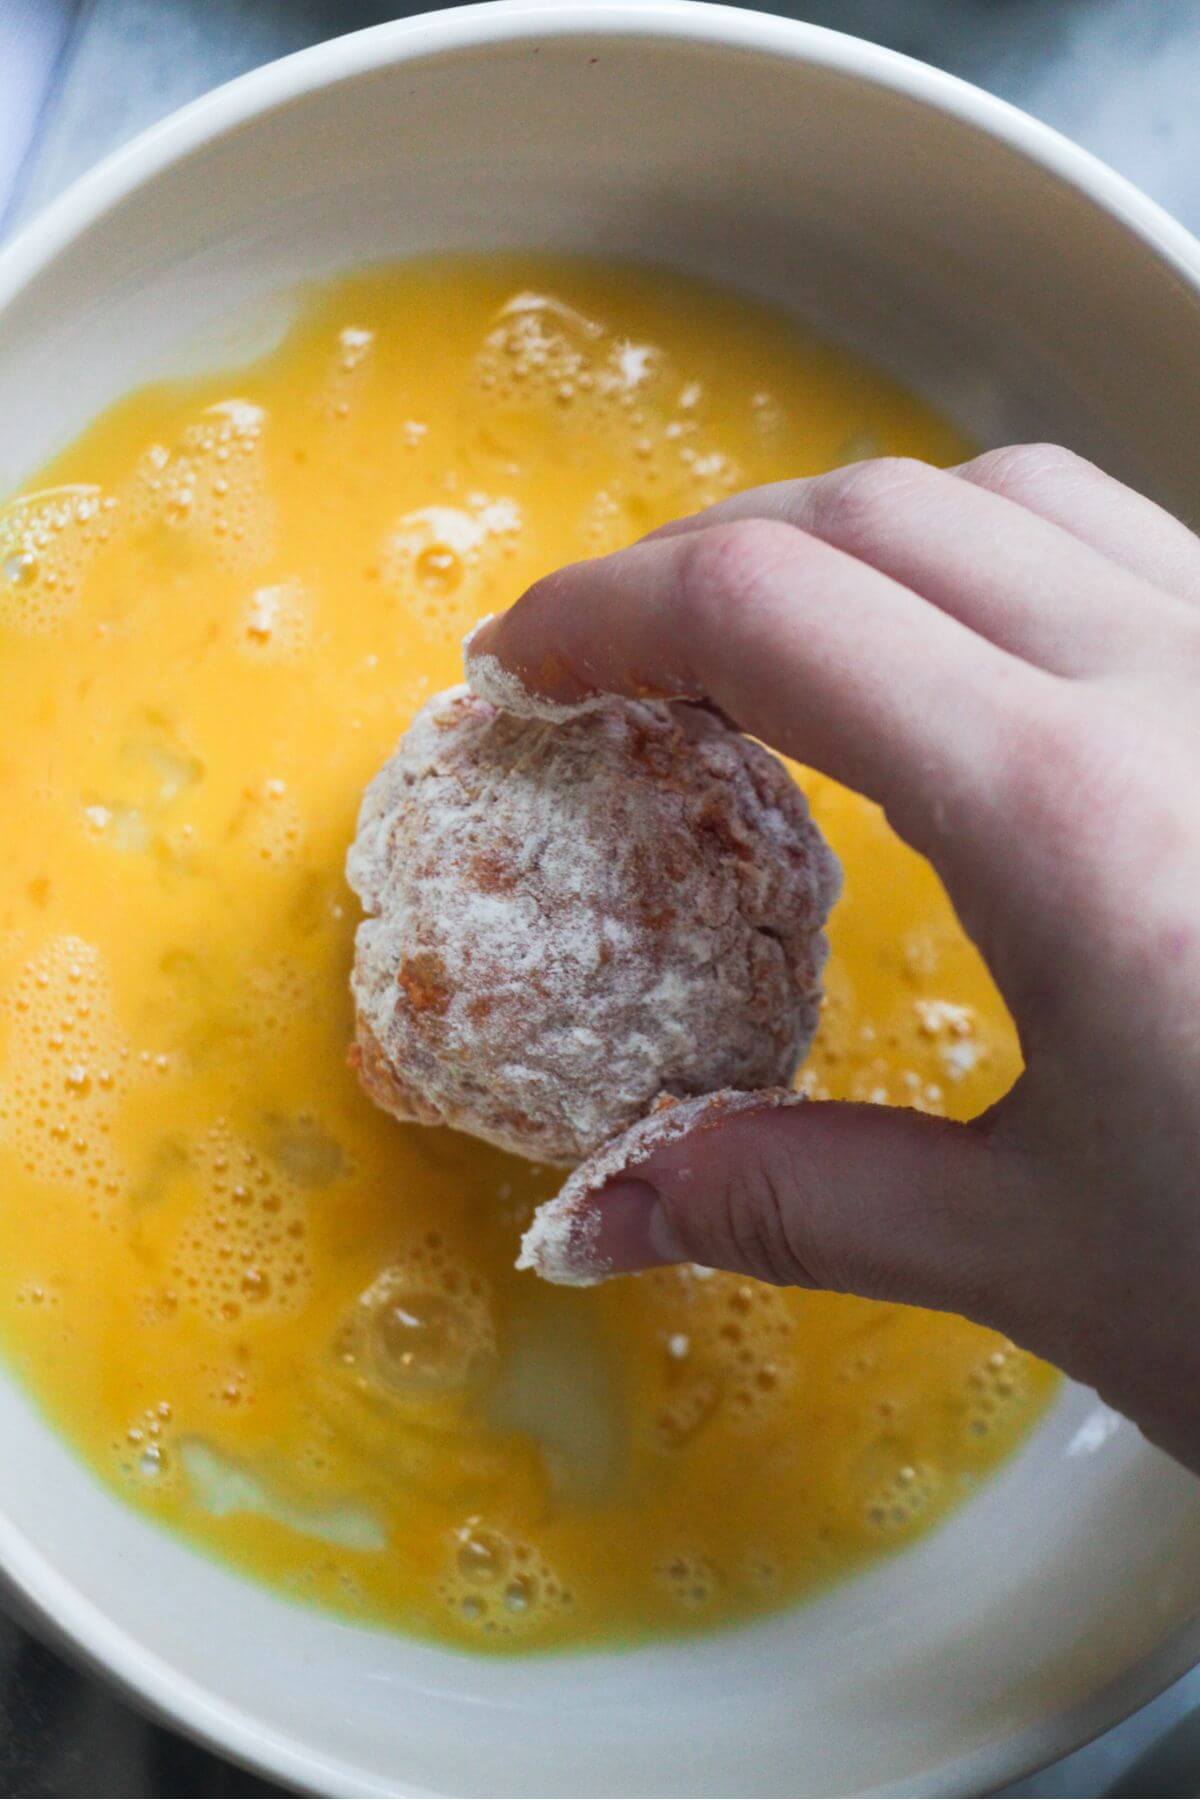 Hand placing flour coated arancini ball into a small bowl of whisked egg.